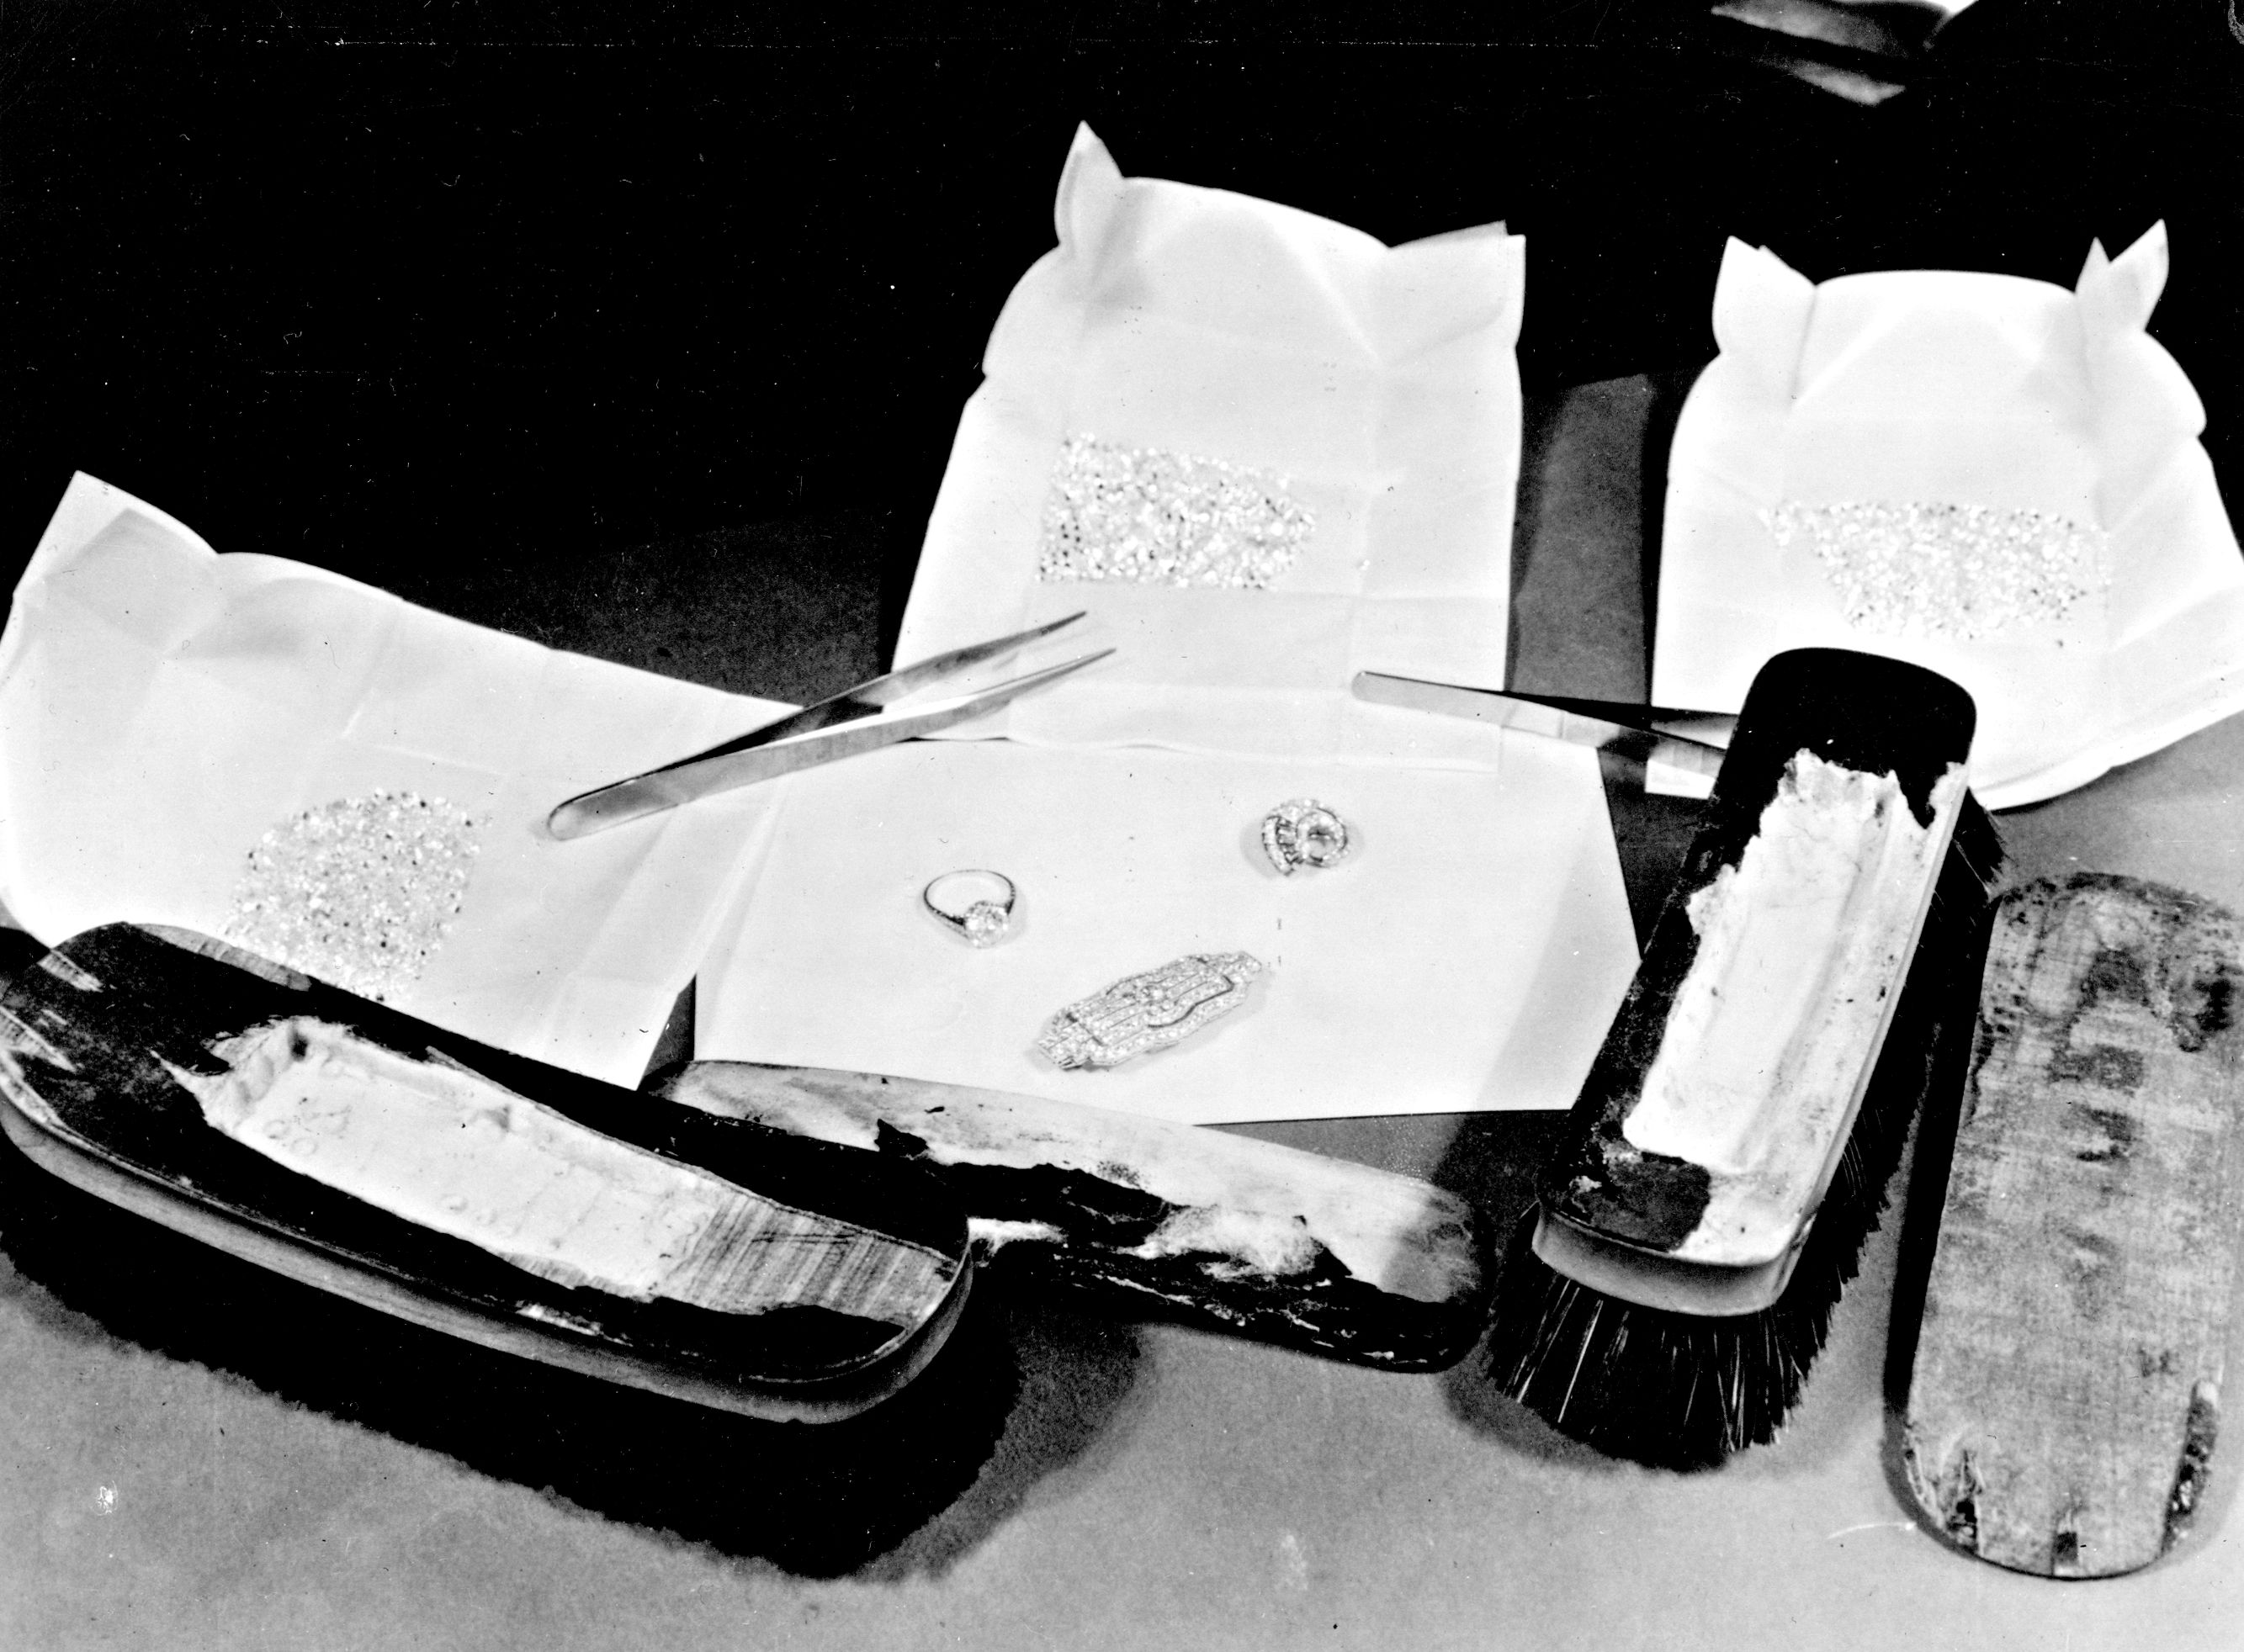 Diamonds concealed in a hollowed out broom handle, discovered by Customs inspectors on board the Queen Elizabeth. (CBP historical collections, 1949)